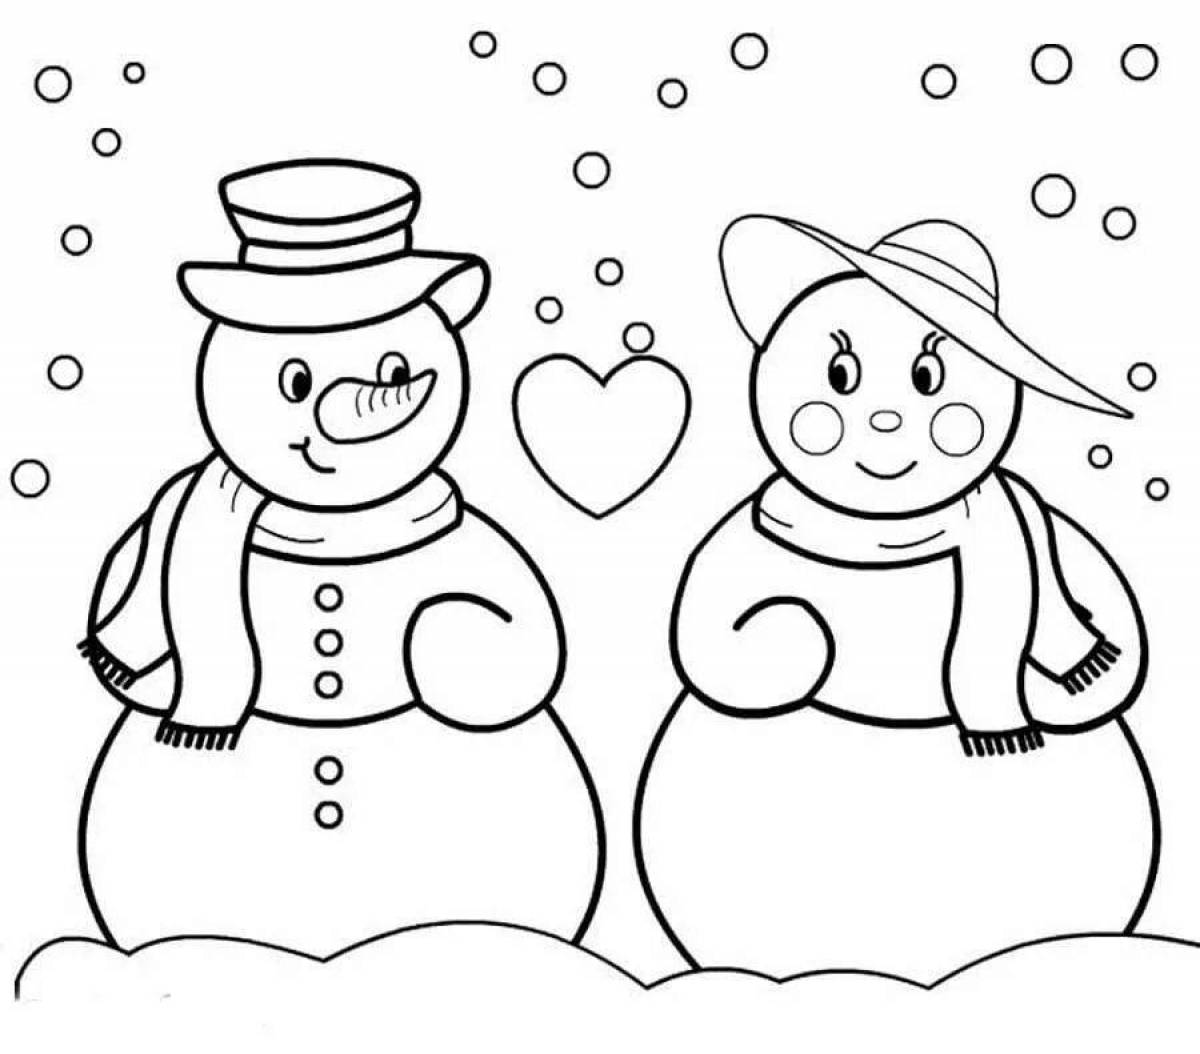 Energetic coloring funny snowman